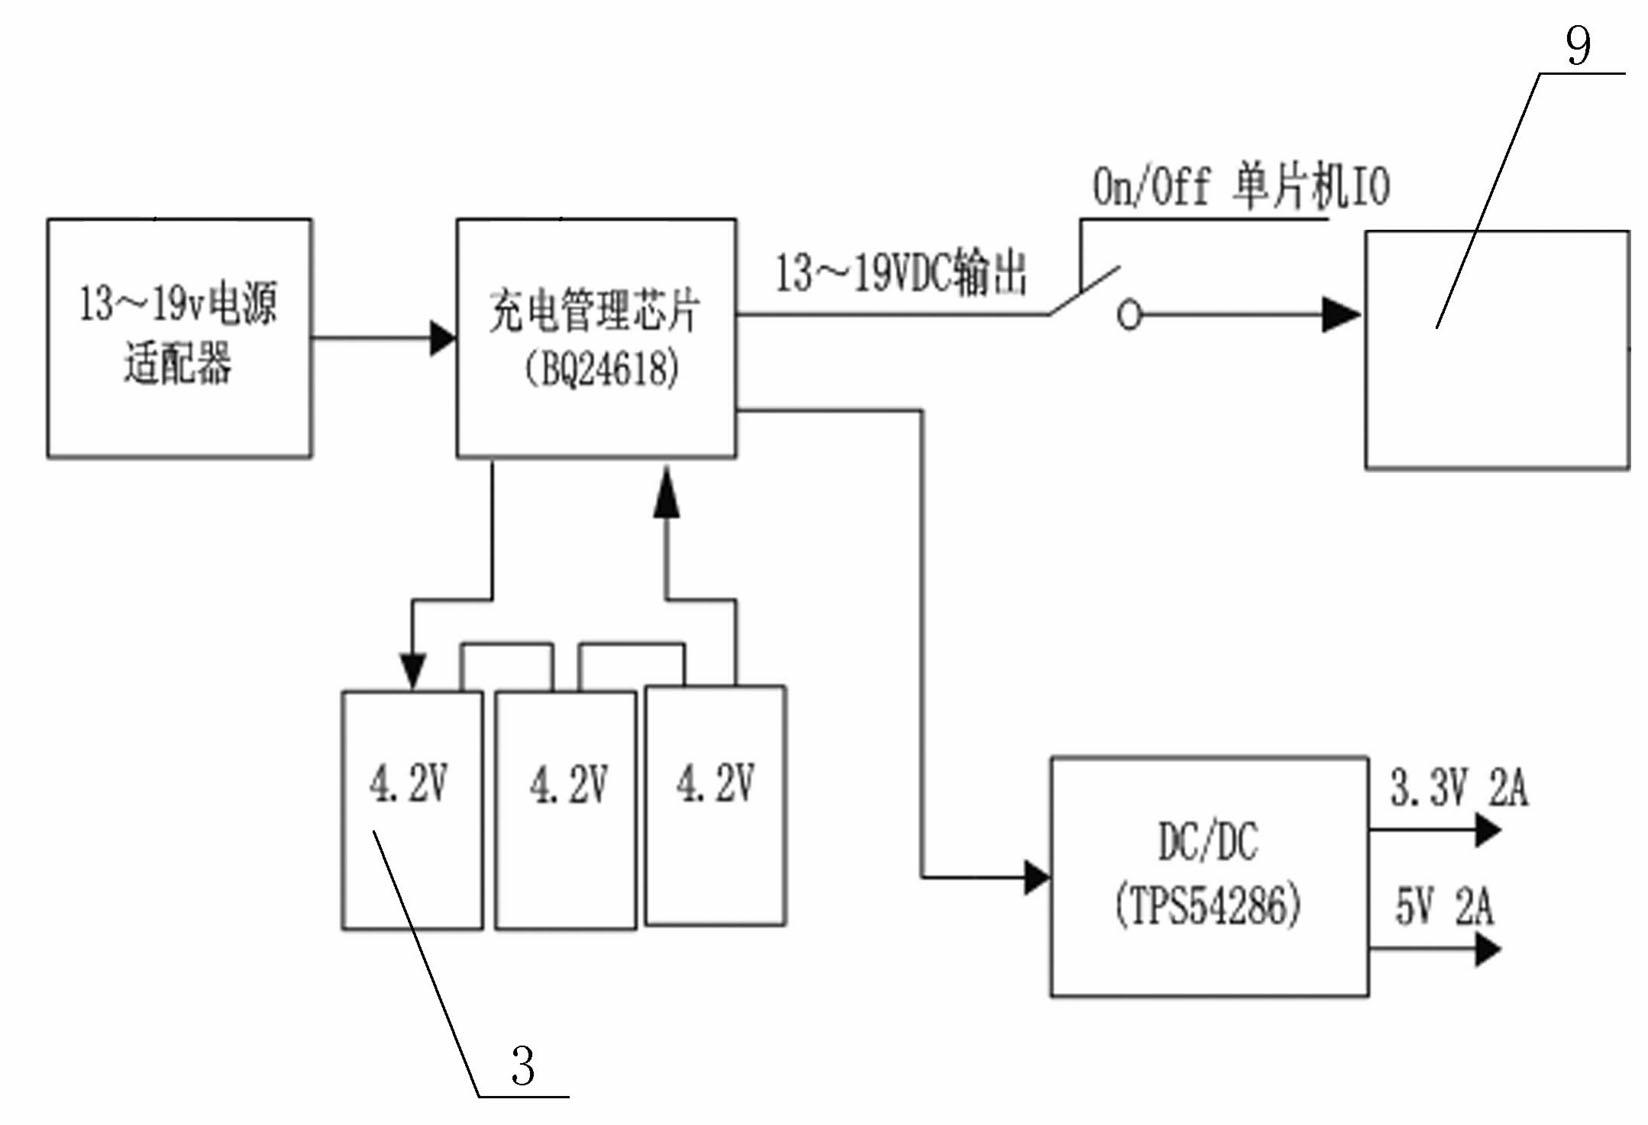 Portable Beidou communication emergency terminal hardware structure with low power consumption